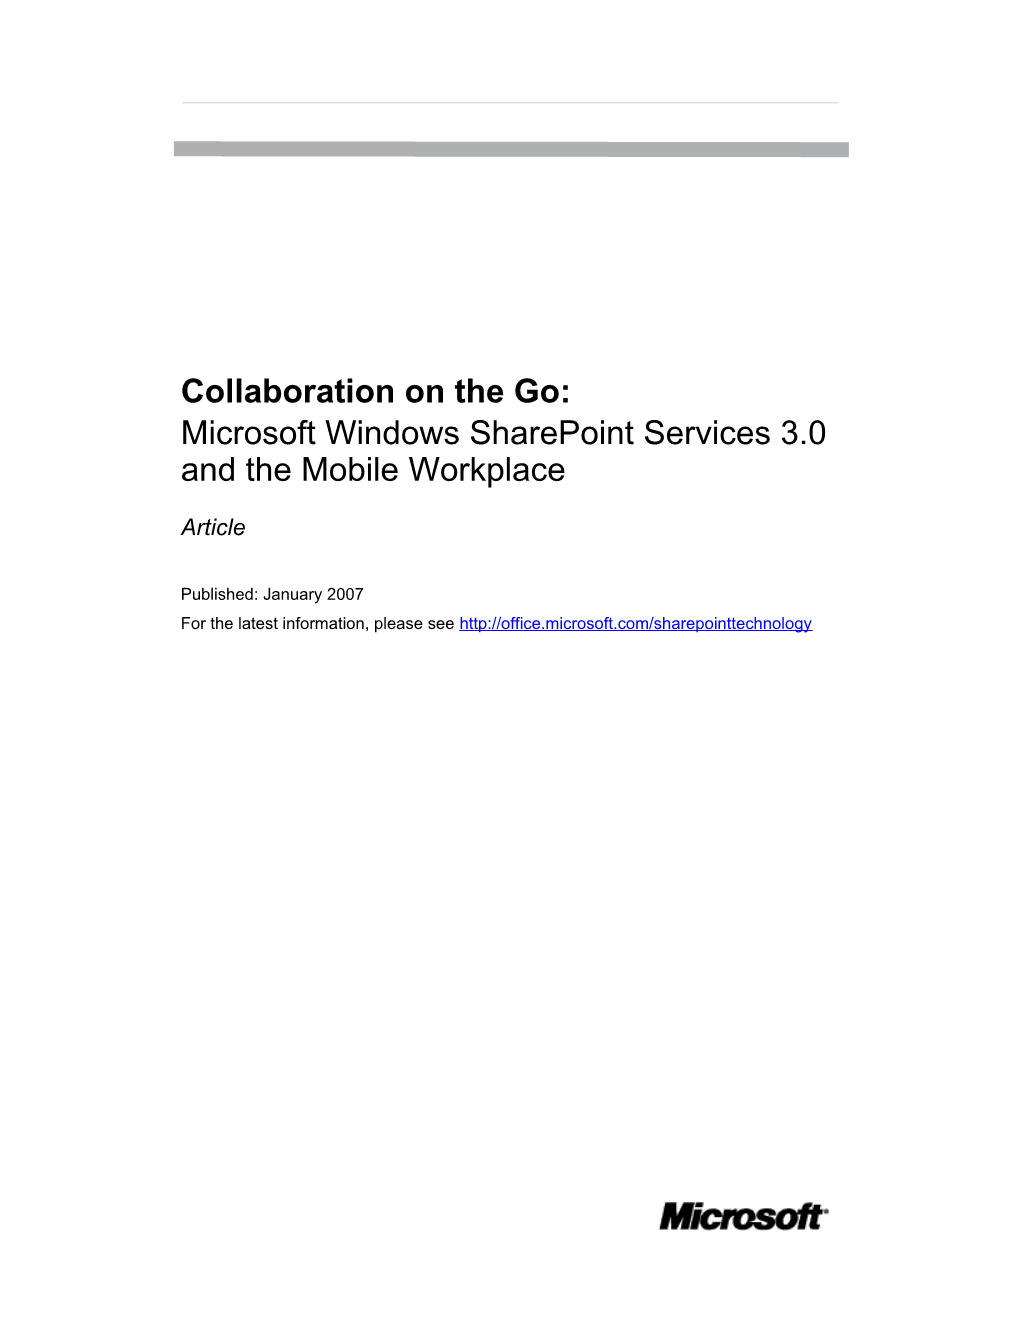 Collaboration on the Go: Microsoft Windows Sharepoint Services 3.0 and the Mobile Workplace1